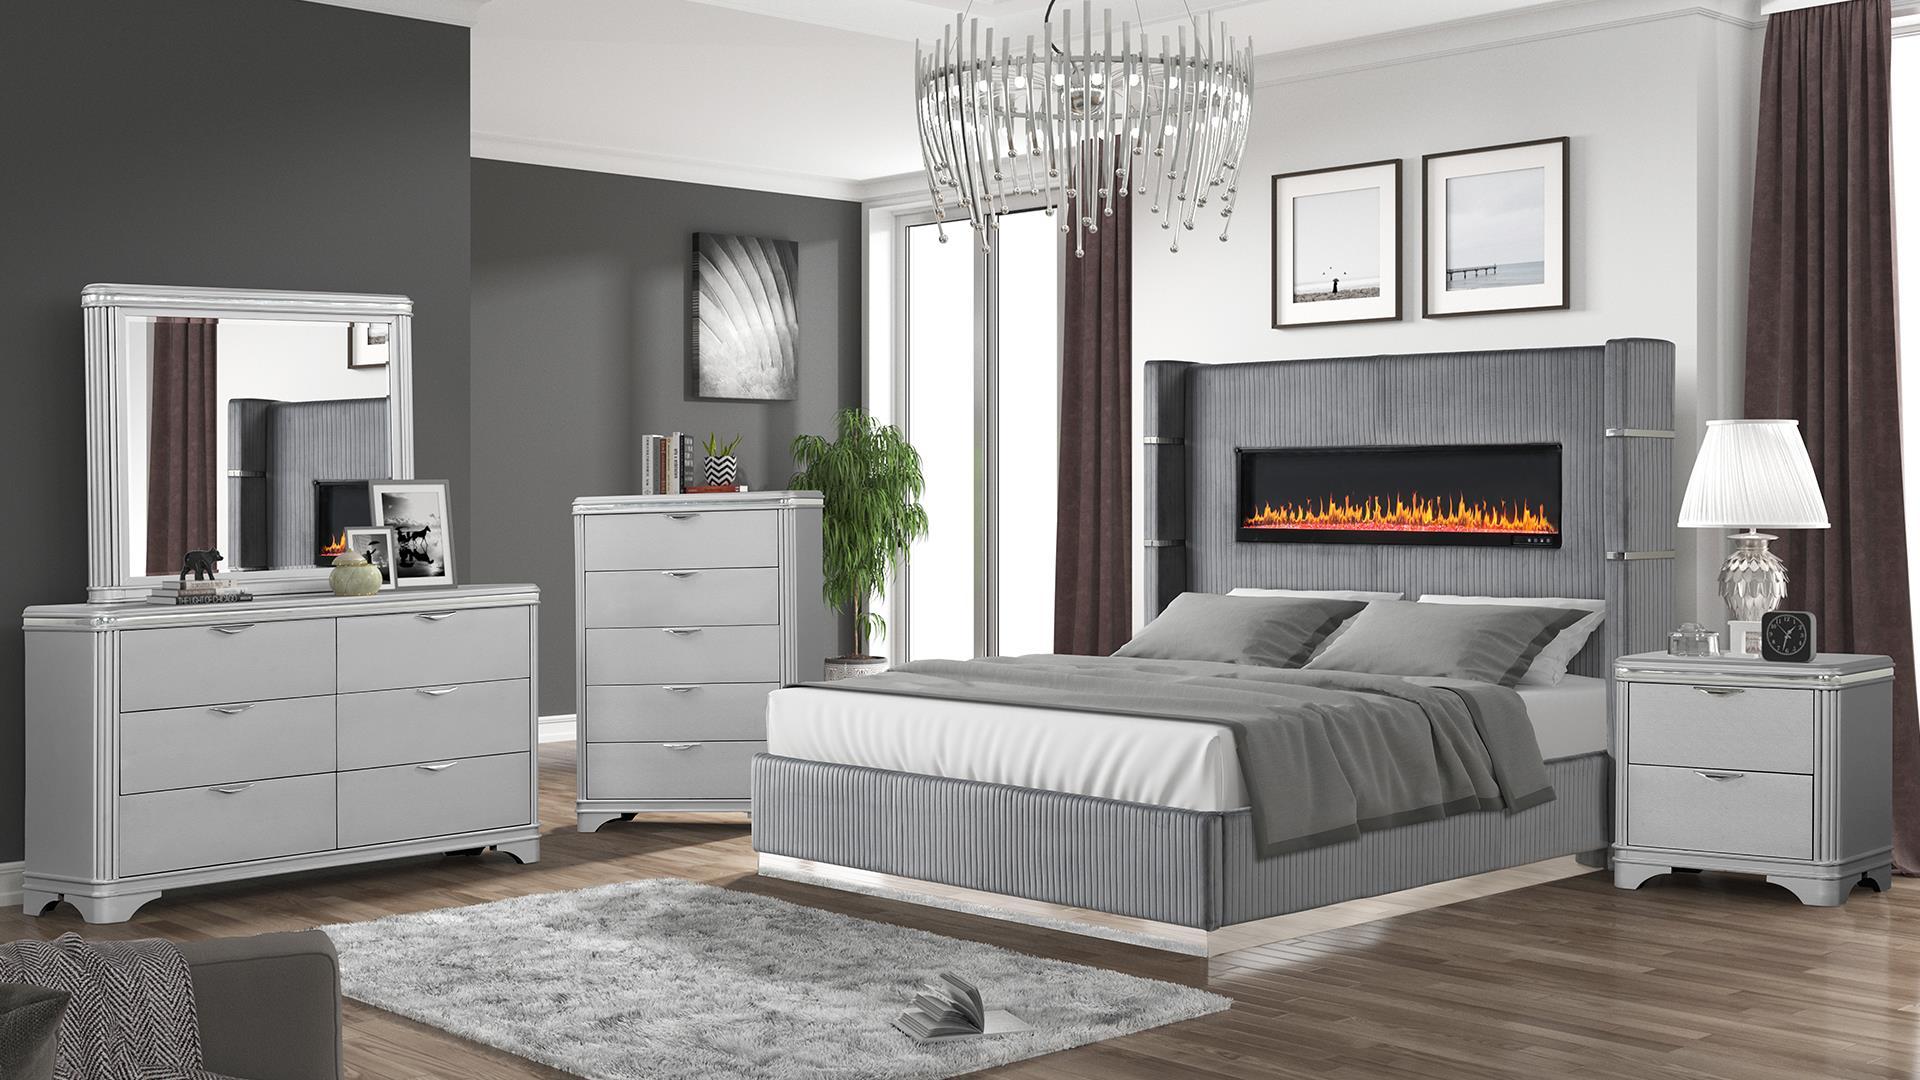 

    
Glam Gray Queen Bedroom Set 4Pcs LIZELLE Galaxy Home Contemporary Luxury
